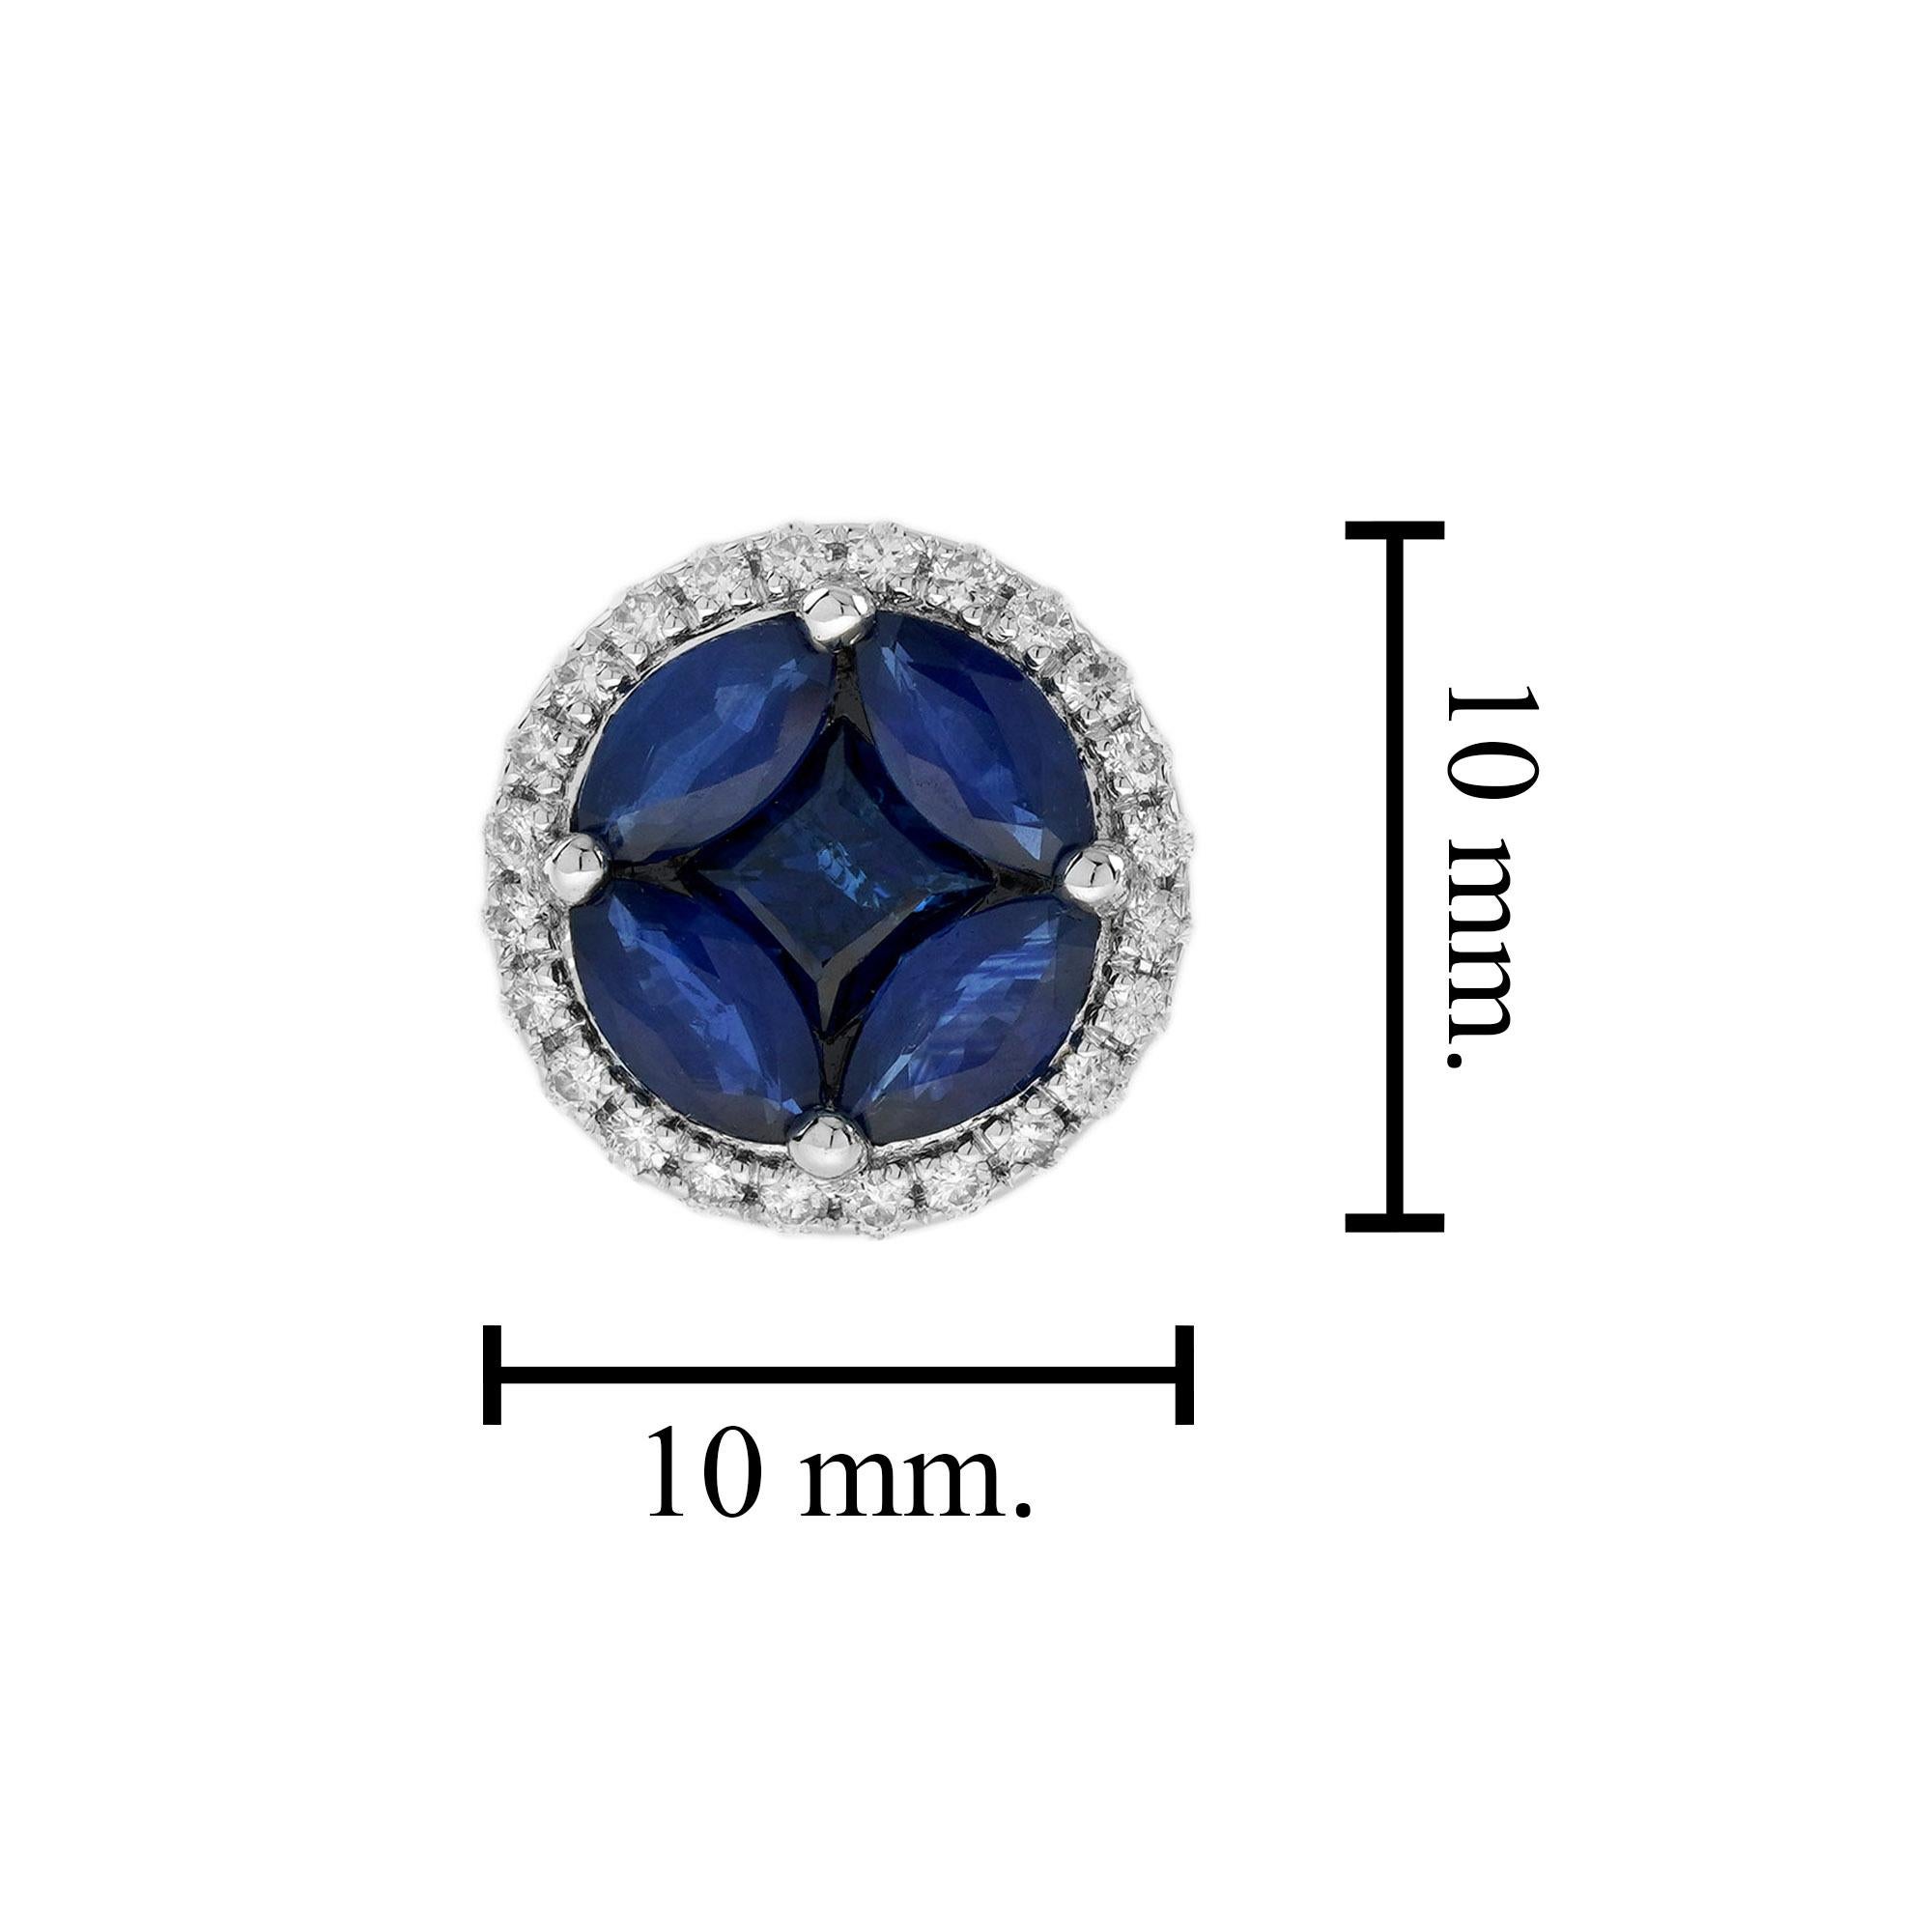 Illusion Set Blue Sapphire and Diamond Halo Stud Earrings in 18K White Gold 1